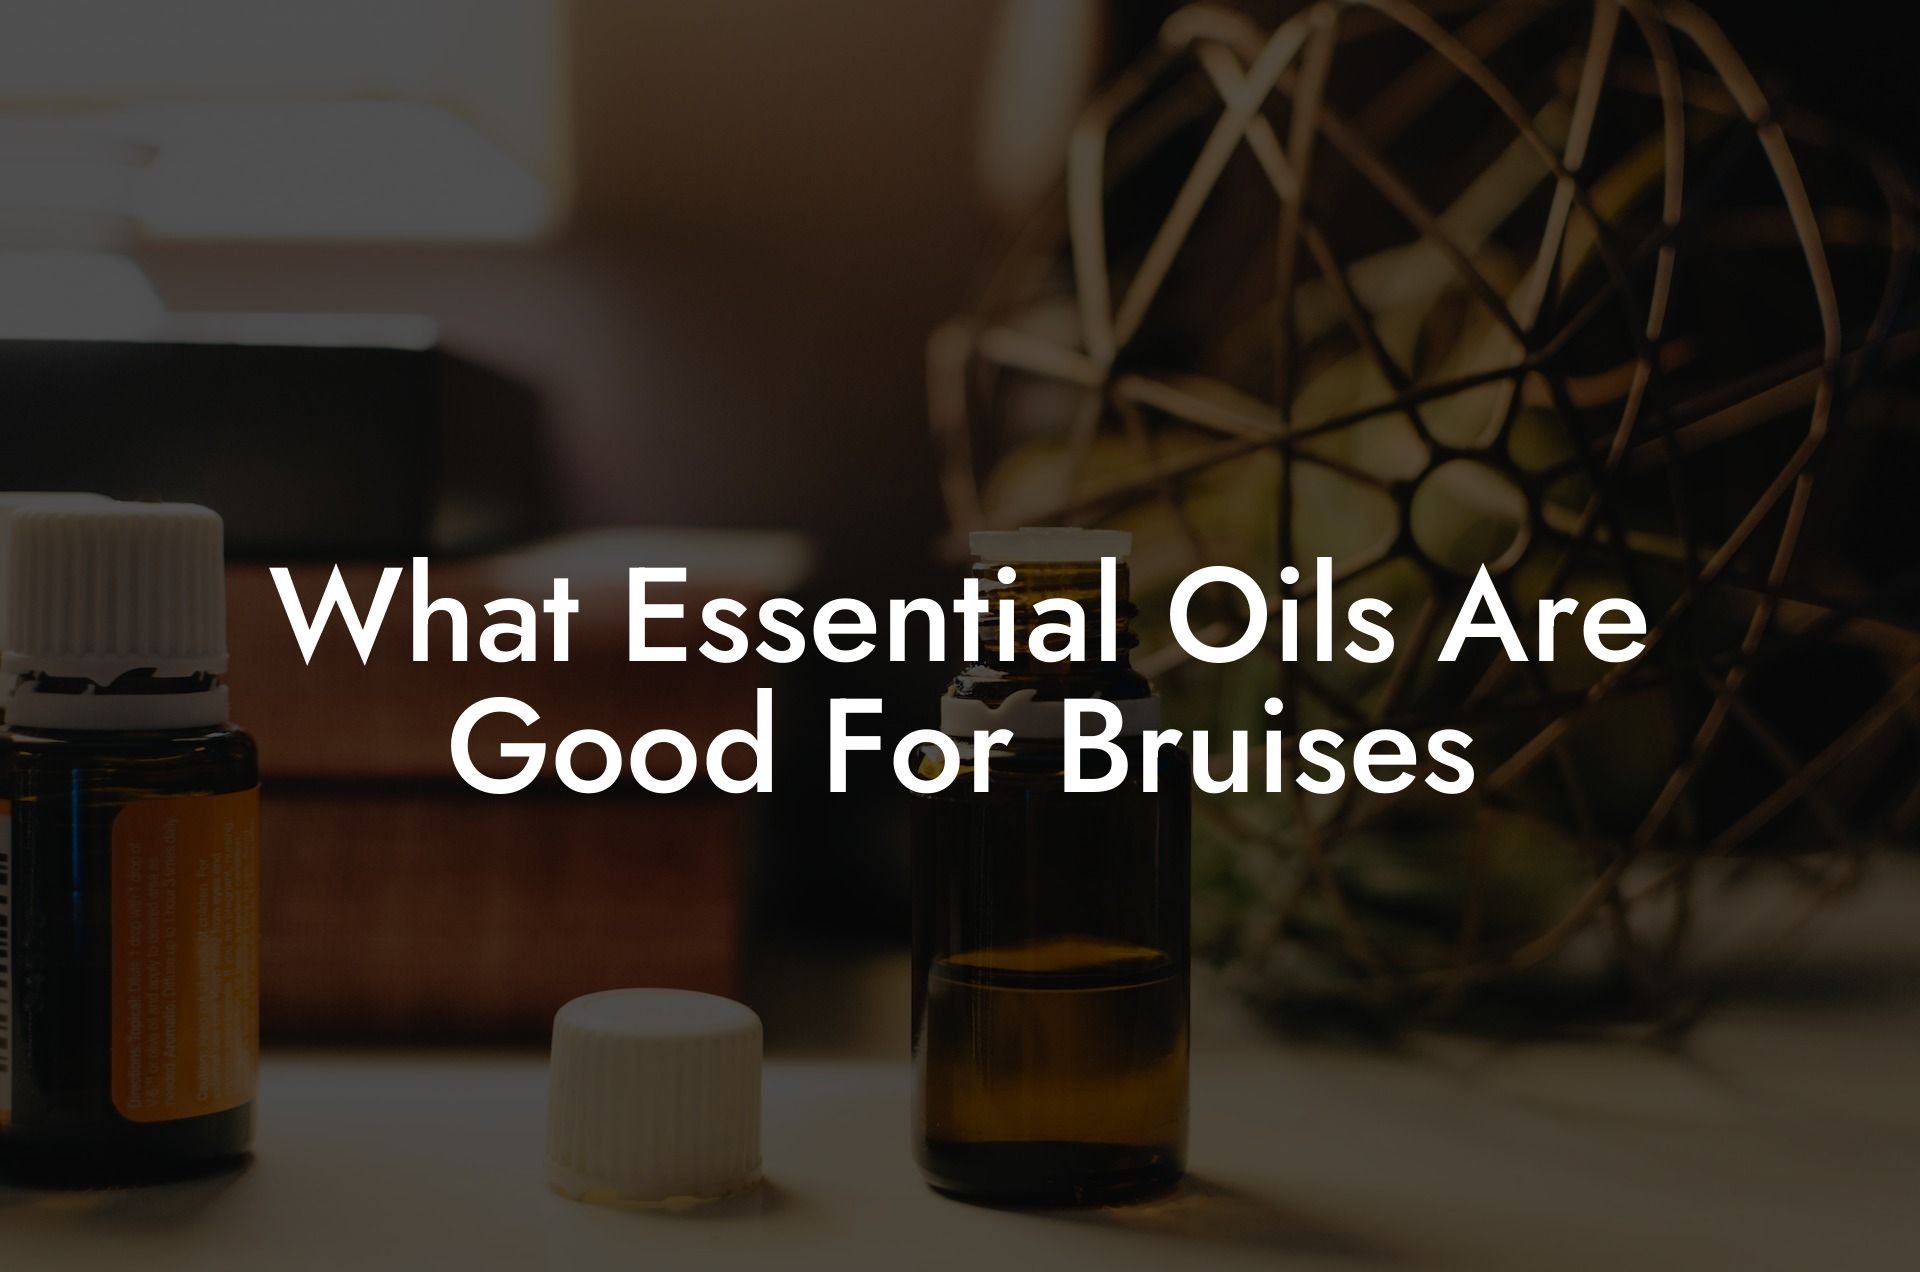 What Essential Oils Are Good For Bruises